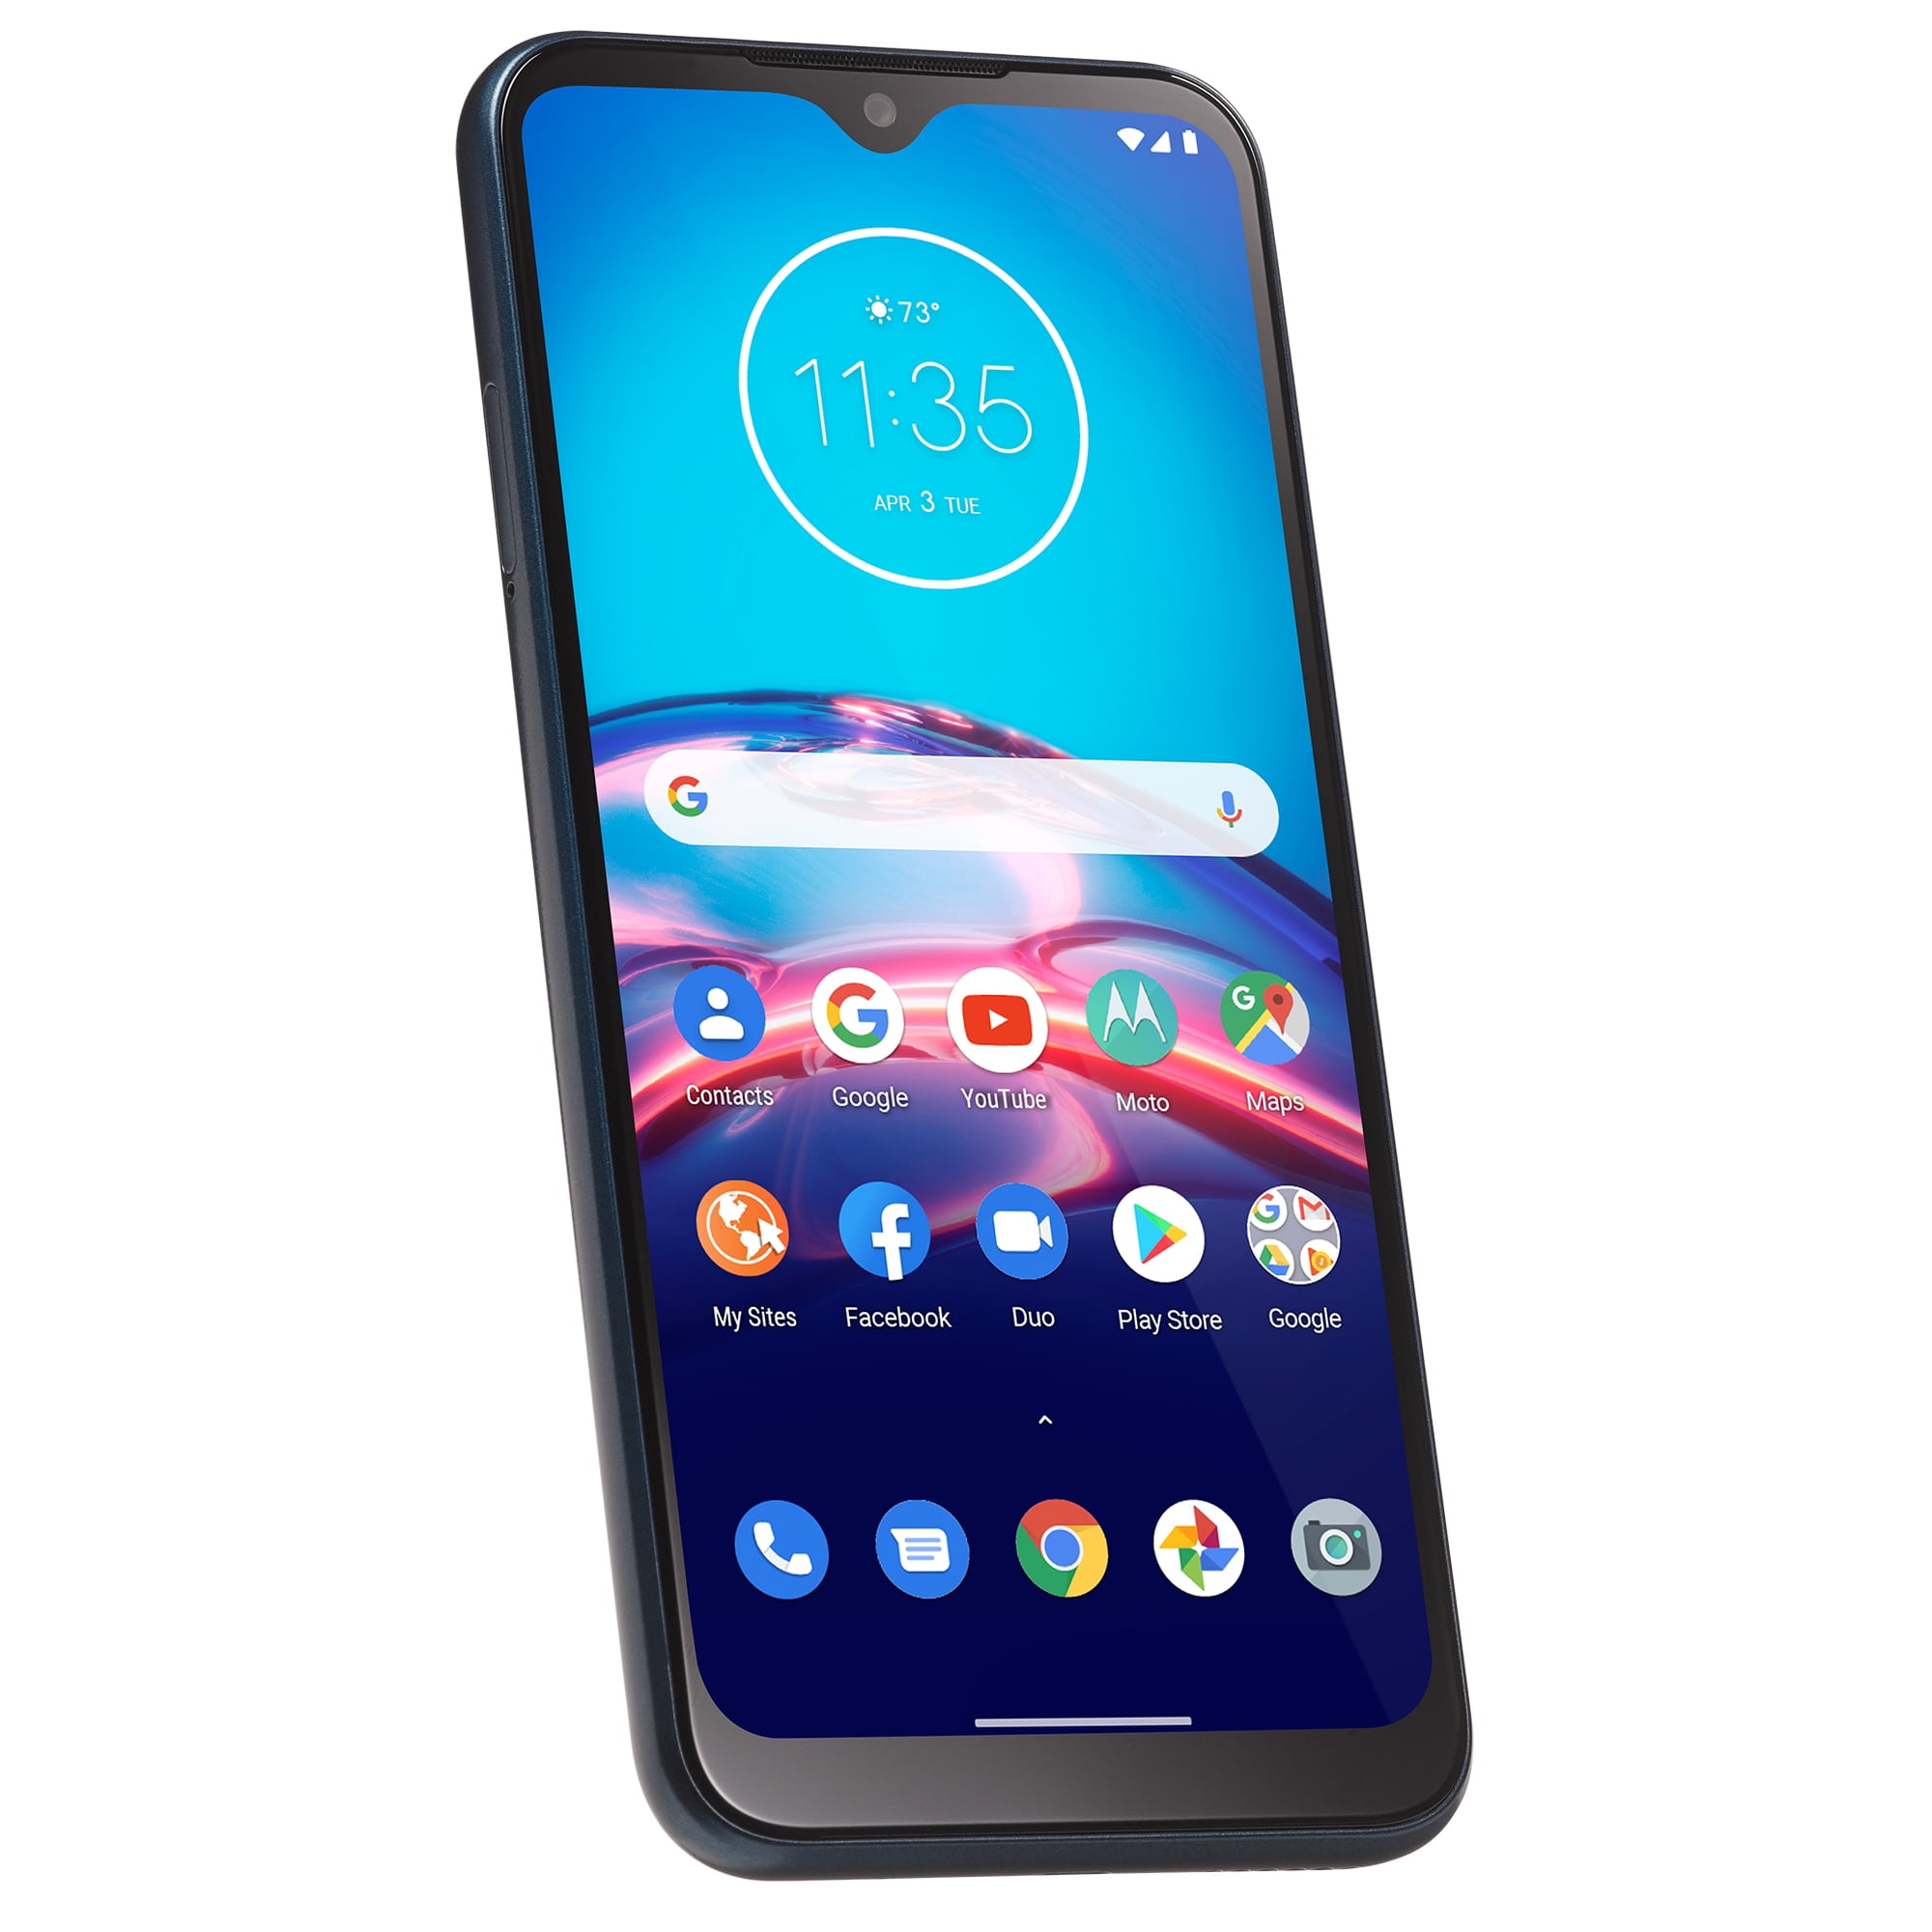 Motorola Moto E4 plus Cell Phones & Smartphones for Sale, Shop New & Used  Cell Phones